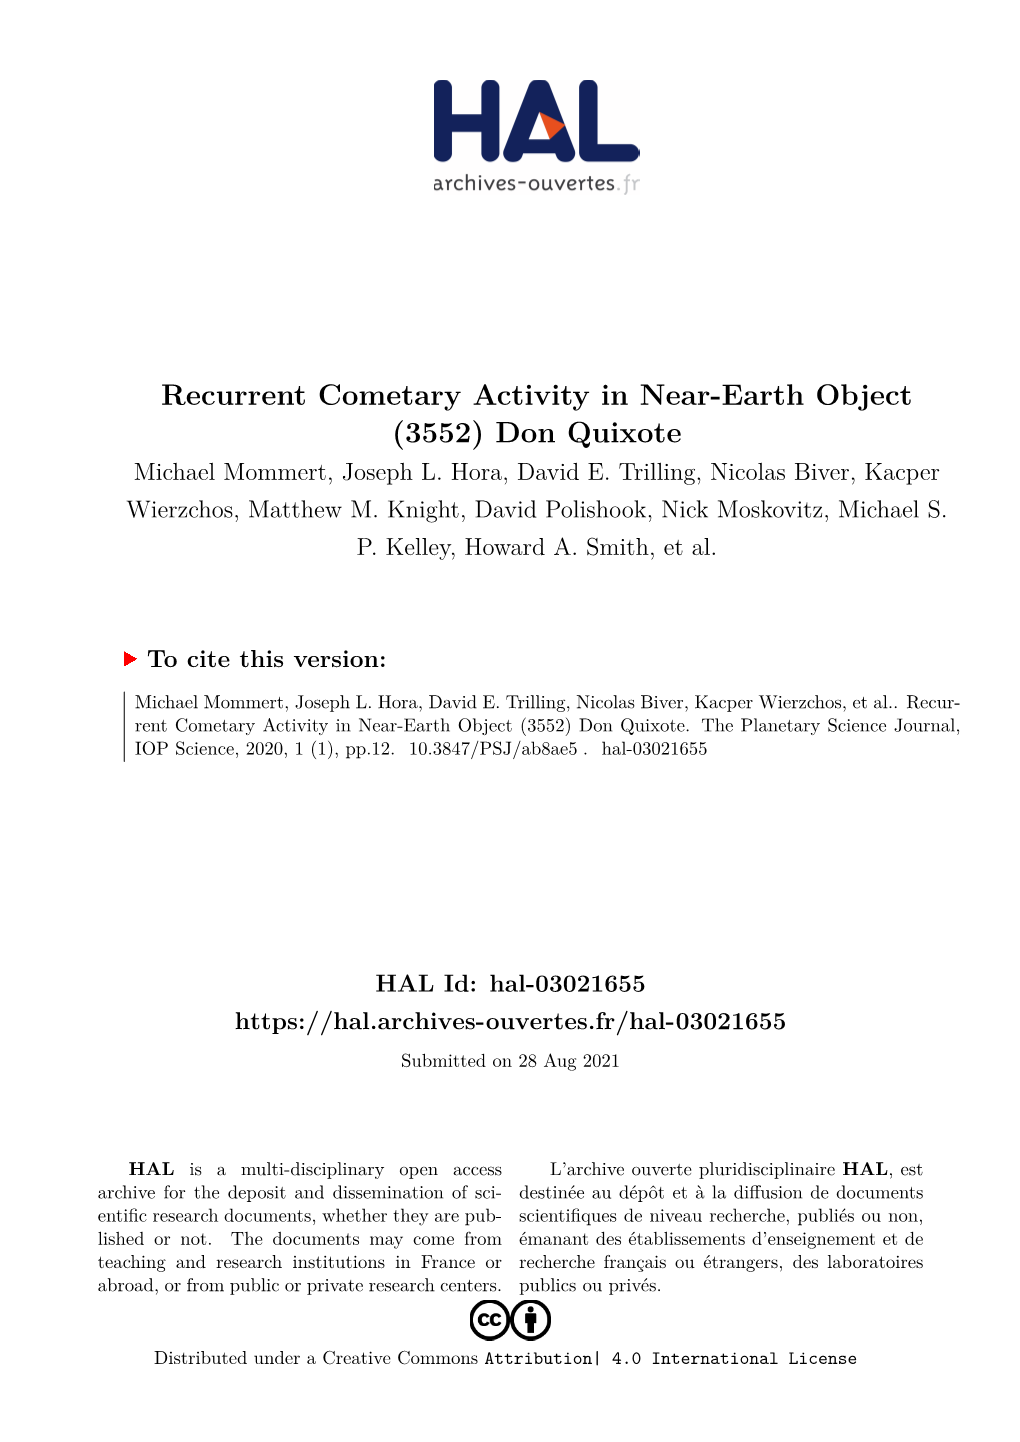 Recurrent Cometary Activity in Near-Earth Object (3552) Don Quixote Michael Mommert, Joseph L